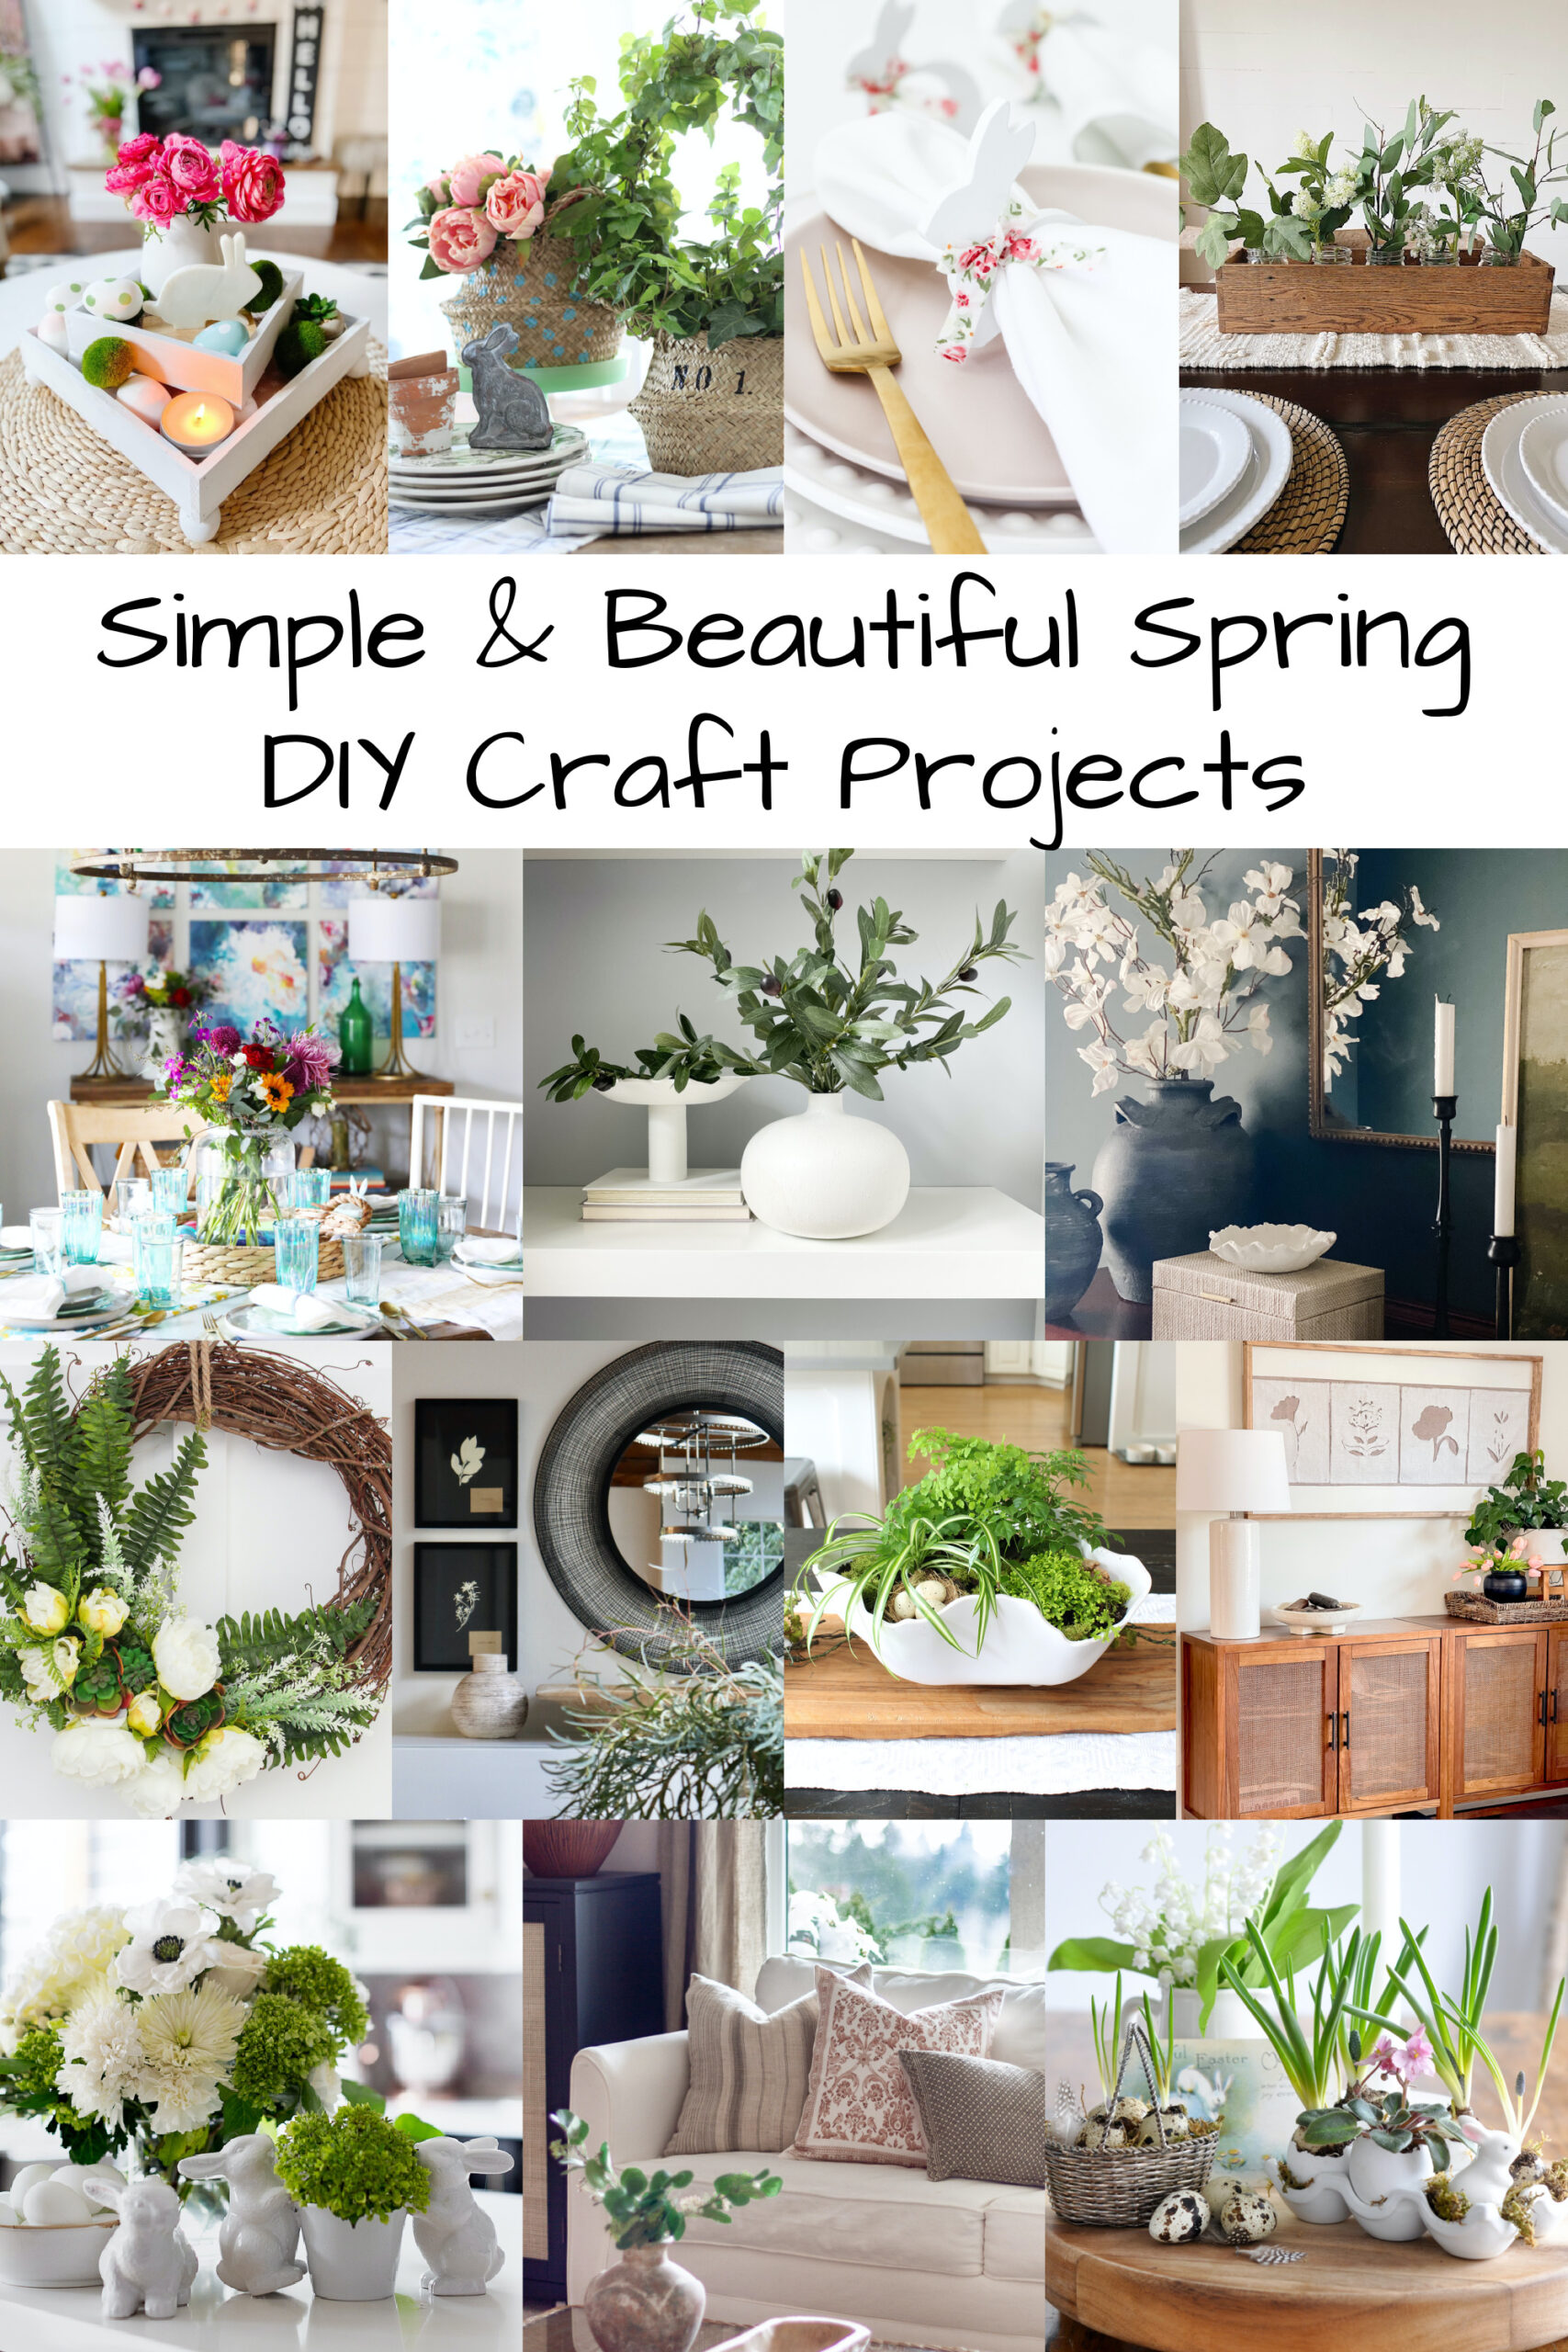 Simple & Beautiful Spring DIY Craft Projects poster.